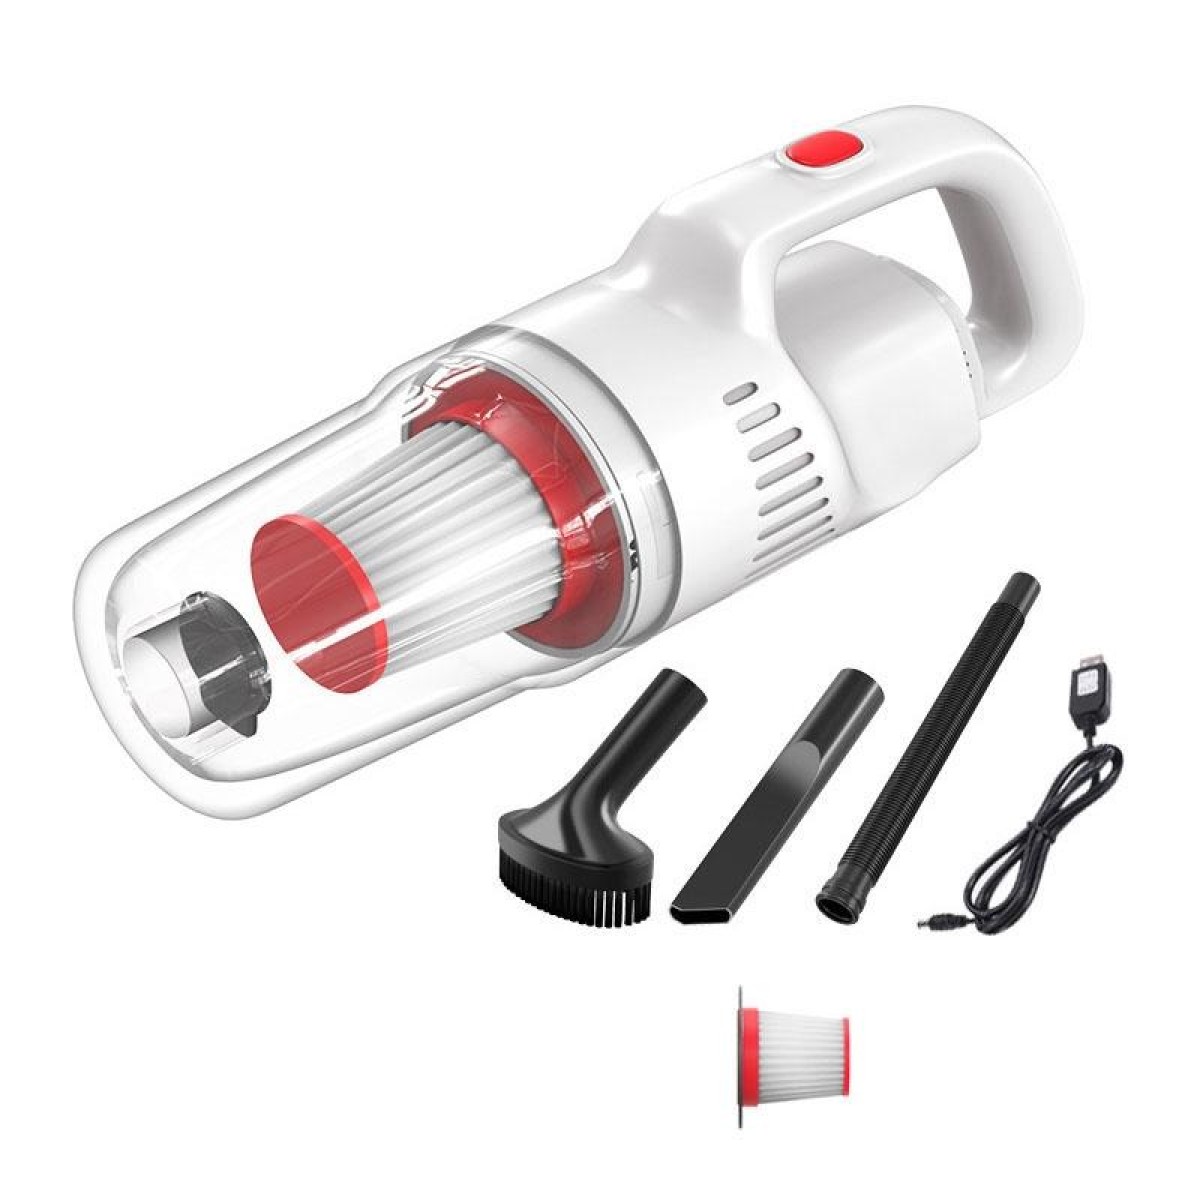 Handheld Household Vacuum Cleaner Car Small Powerful Dust Extractor, Model: Wireless Standard